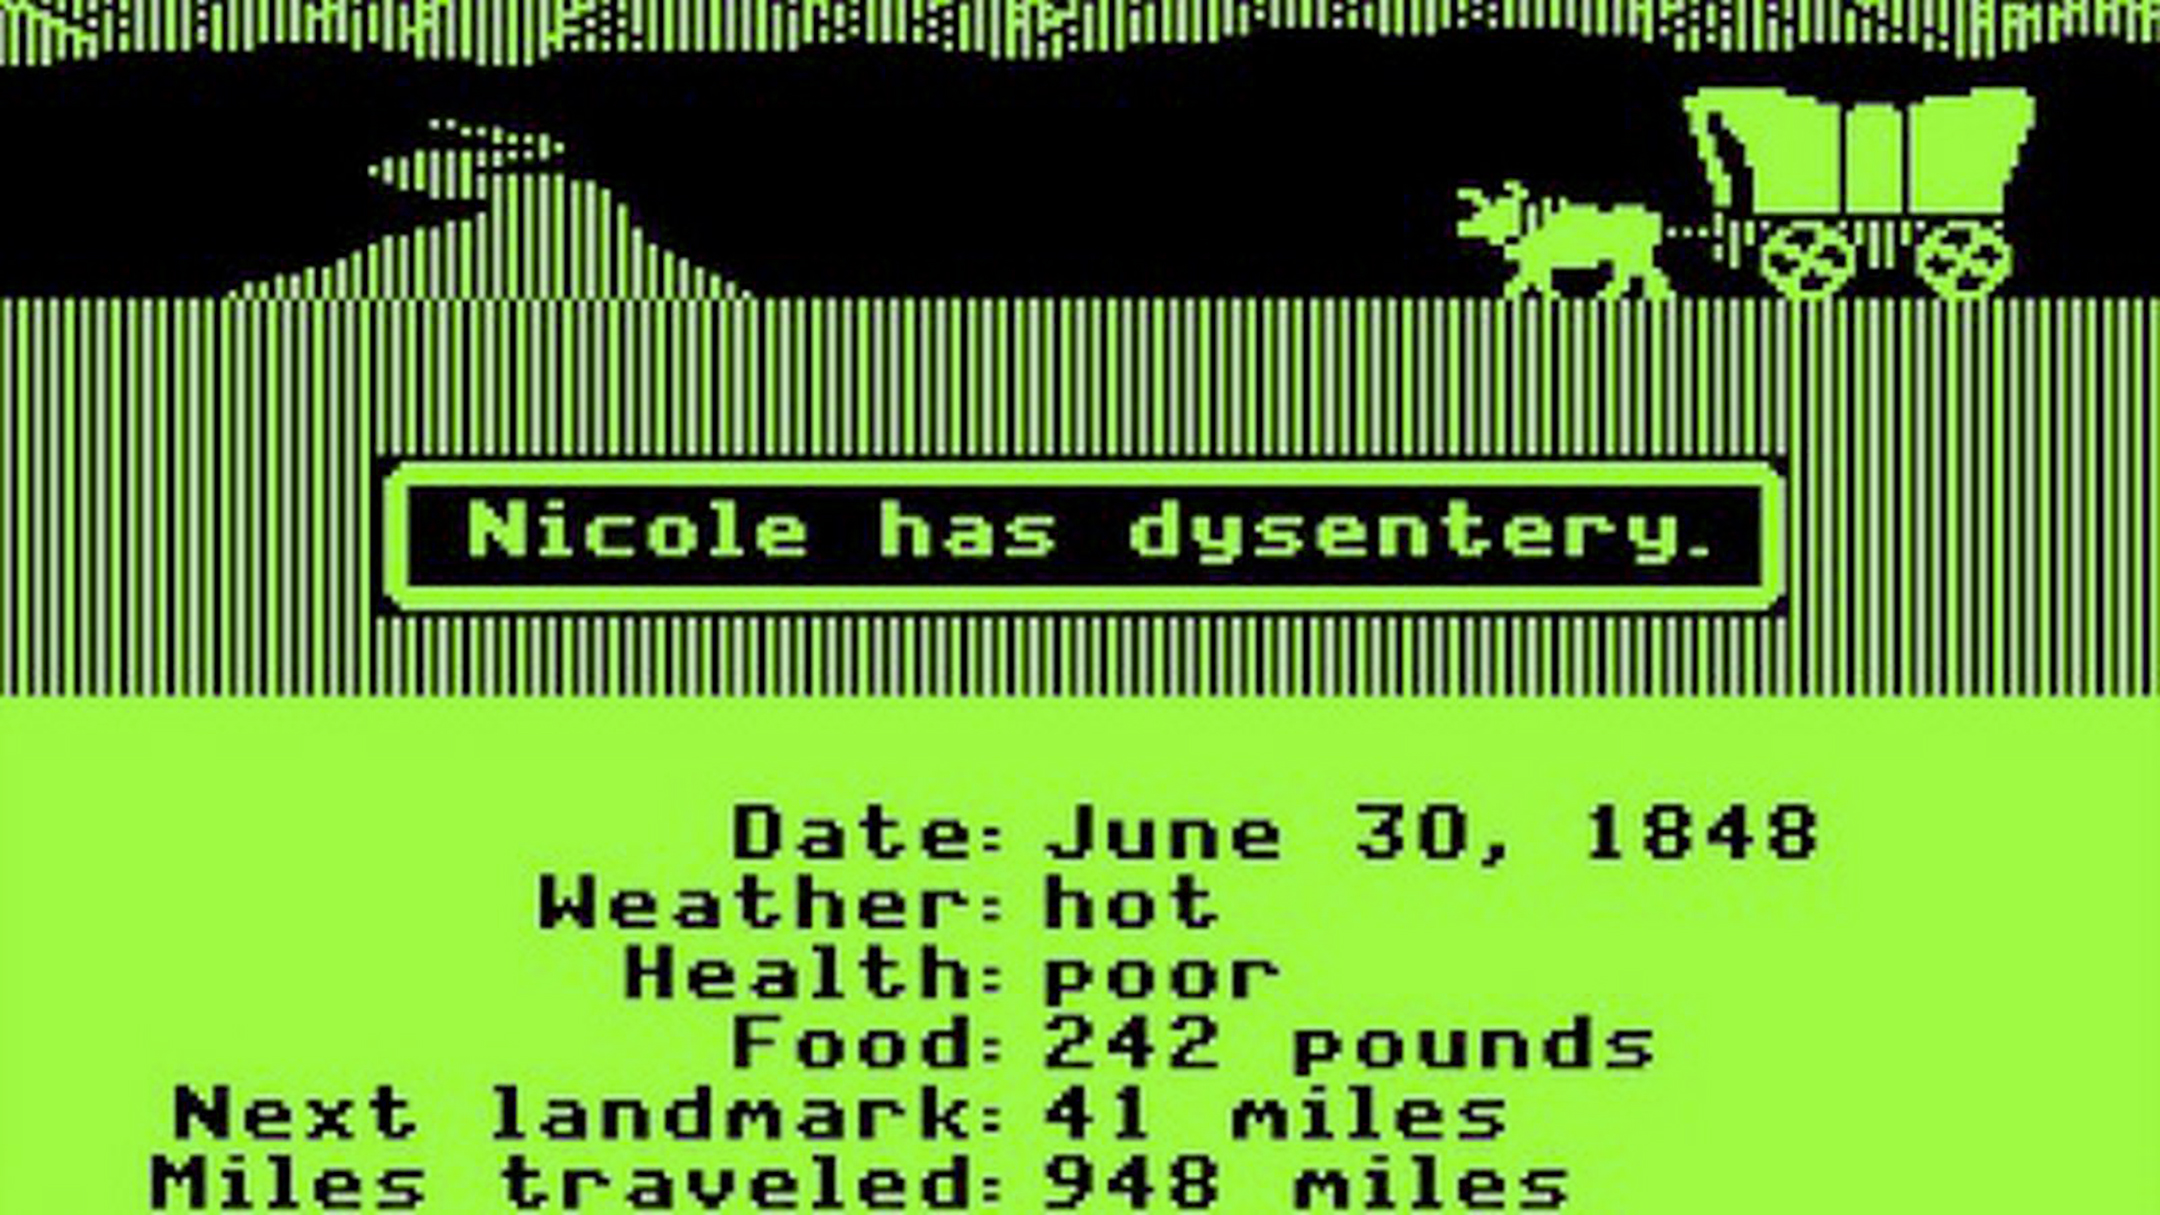 Screenshot from the computer game The Oregon Trail showing an ox-pulled wagon walking along a river bed in green on a black background with the statement "Nicole has dysentery" underneath